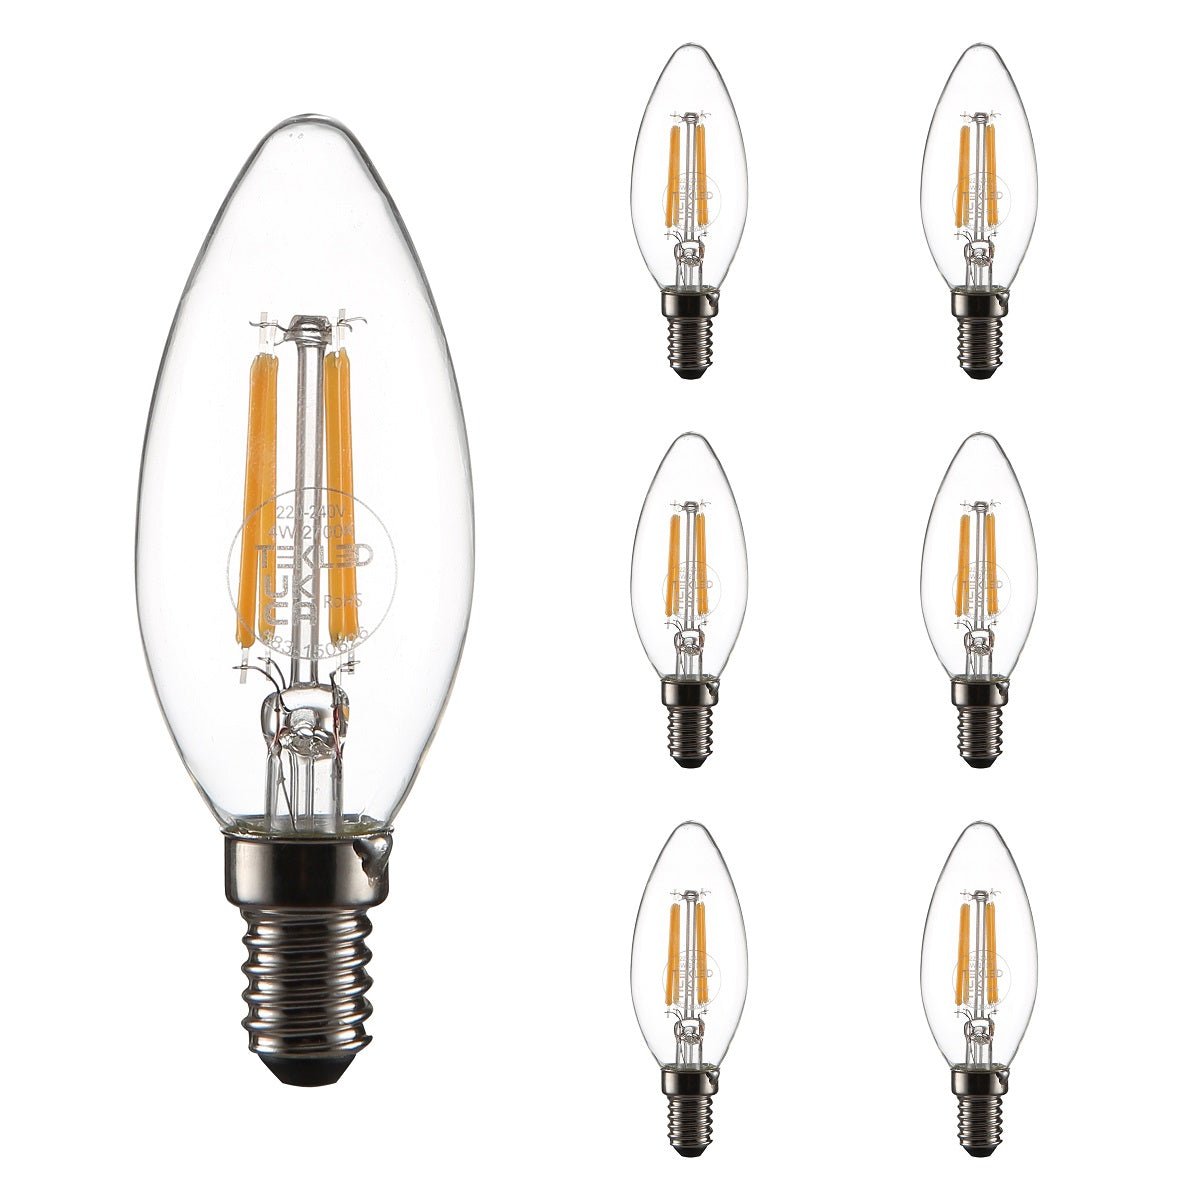 LED Dimmable Filament C35 Candle Bulb E14 Small Edison Screw 4W Pack of 6 Warm White